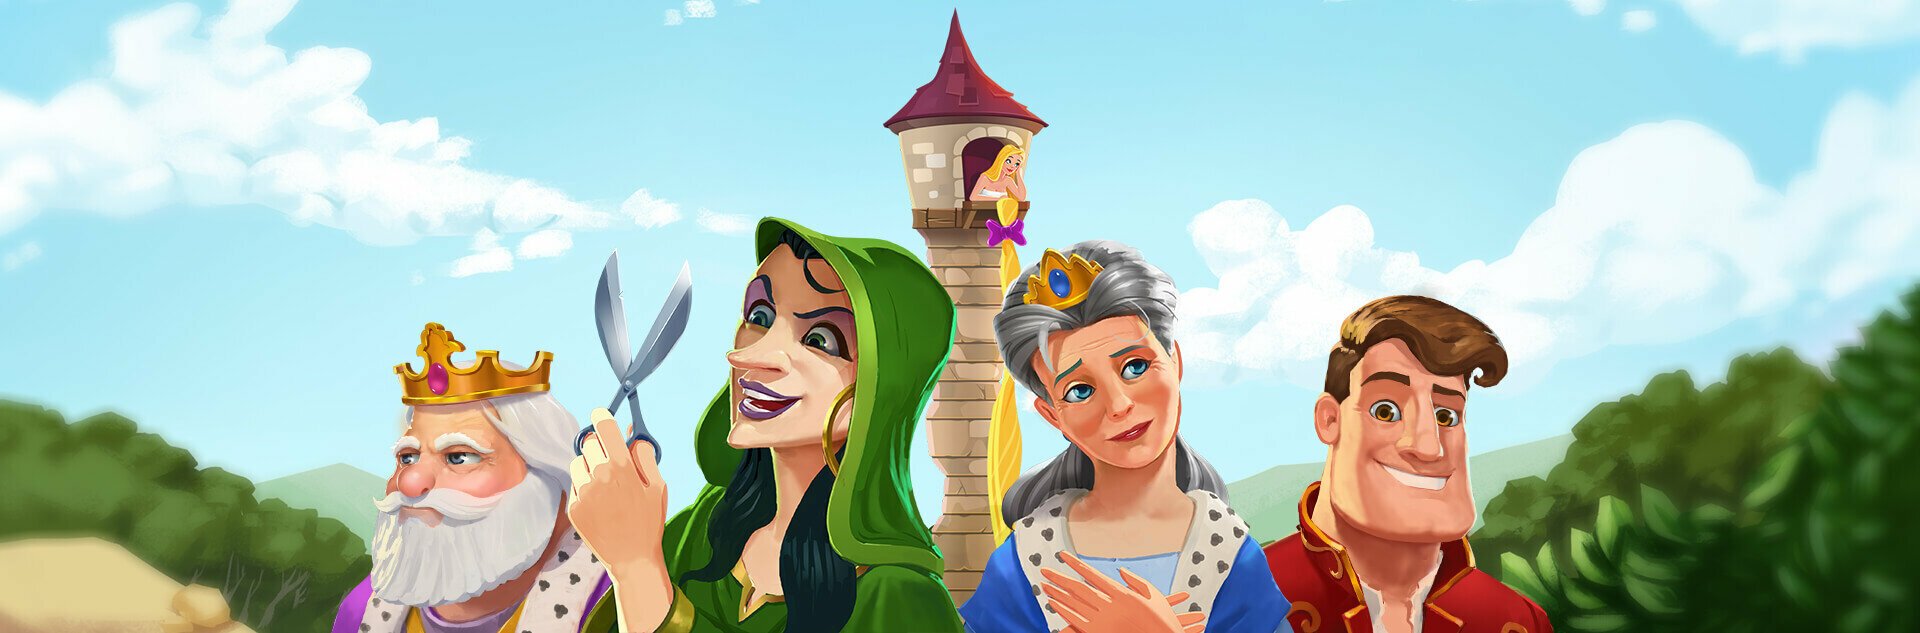 Play Rapunzel’s Tower Free Slot